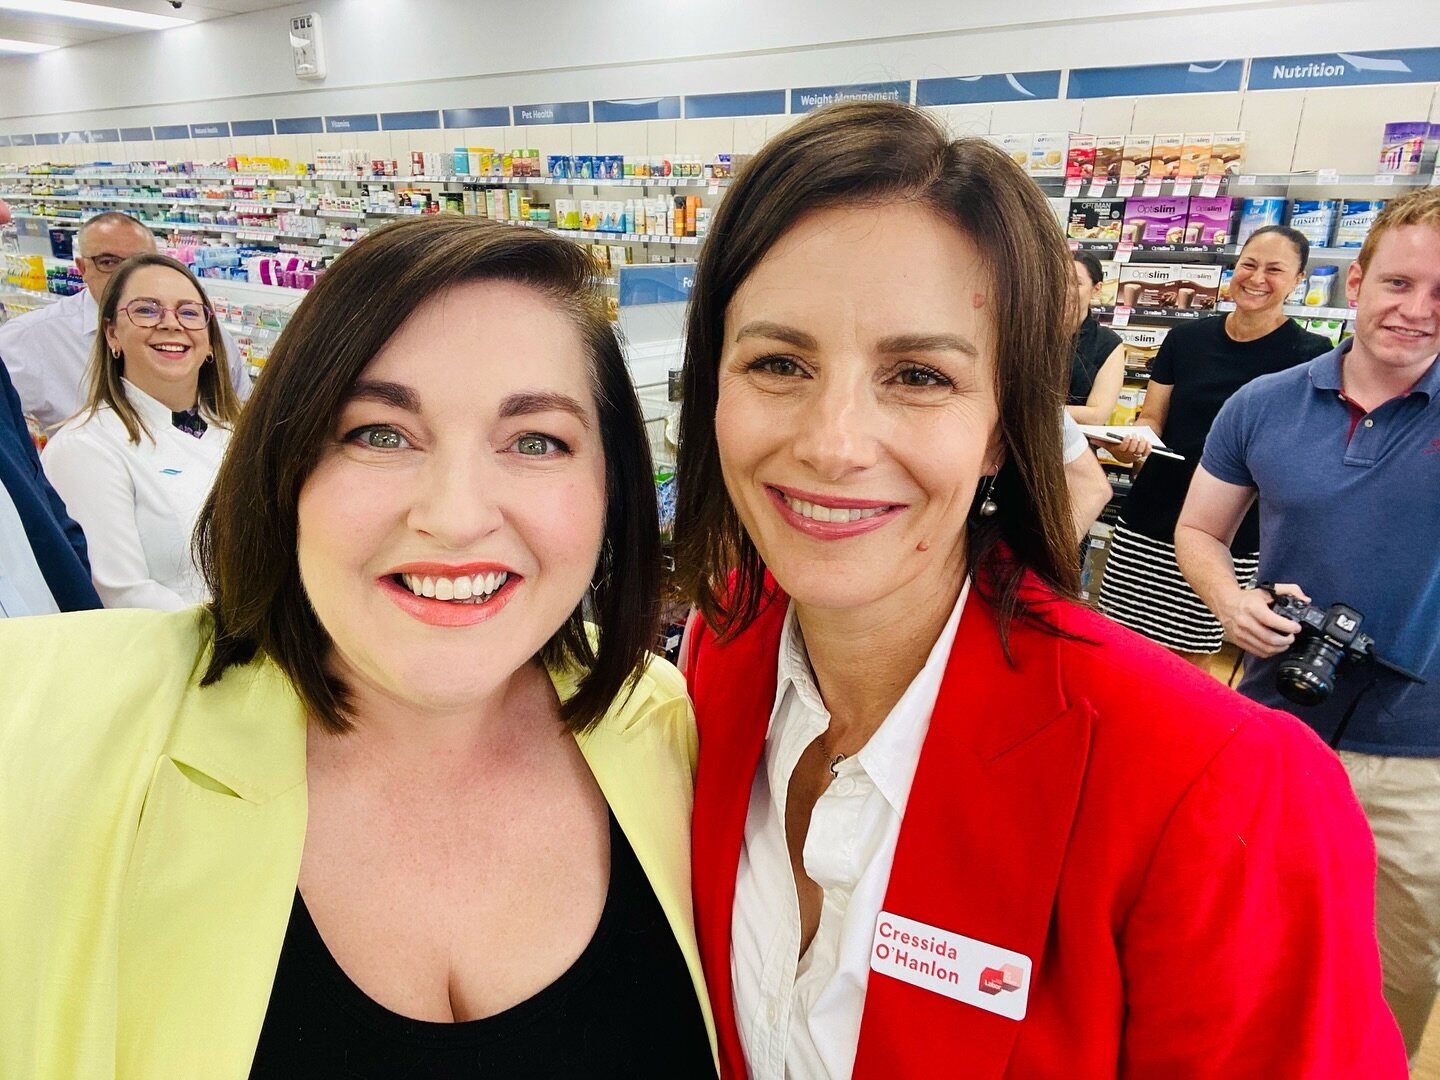 This is my awesome long-time pal @cressida_ohanlon 

She&rsquo;s running for @southaustralianlabor for the seat of Dunstan in tomorrow&rsquo;s by-election.

I could give you all the key talking points, but I reckon most people just want an MP who is 